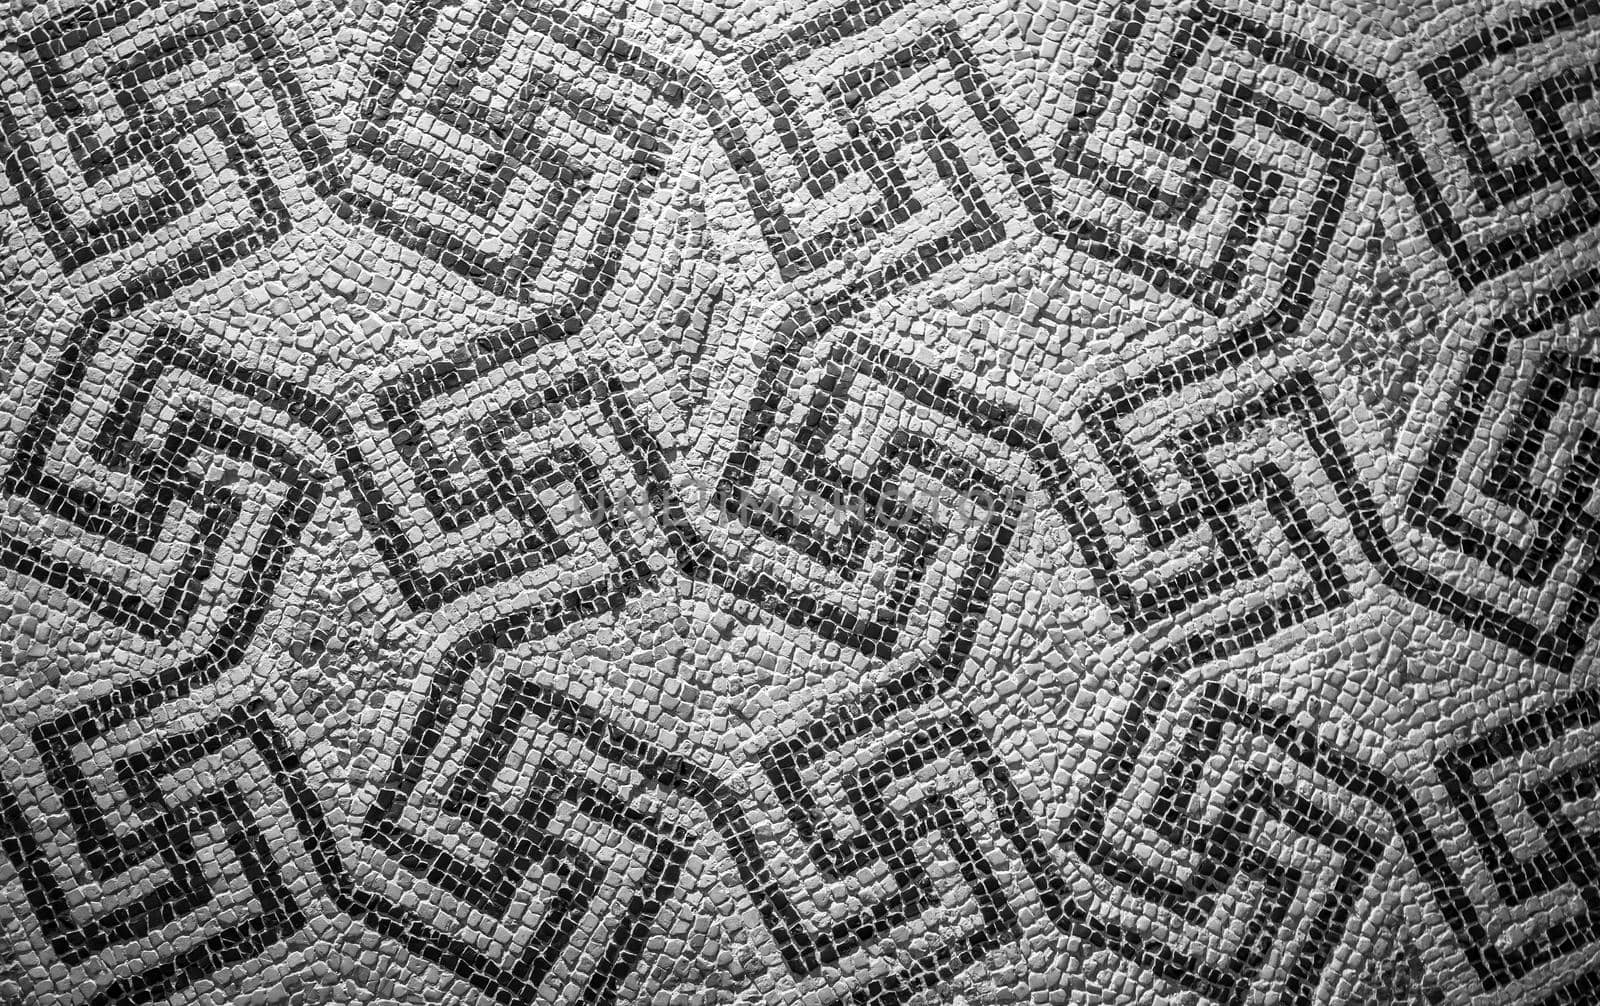 Swastika symbol in ancient Celtic mosaic decoration. Design for an old style background.